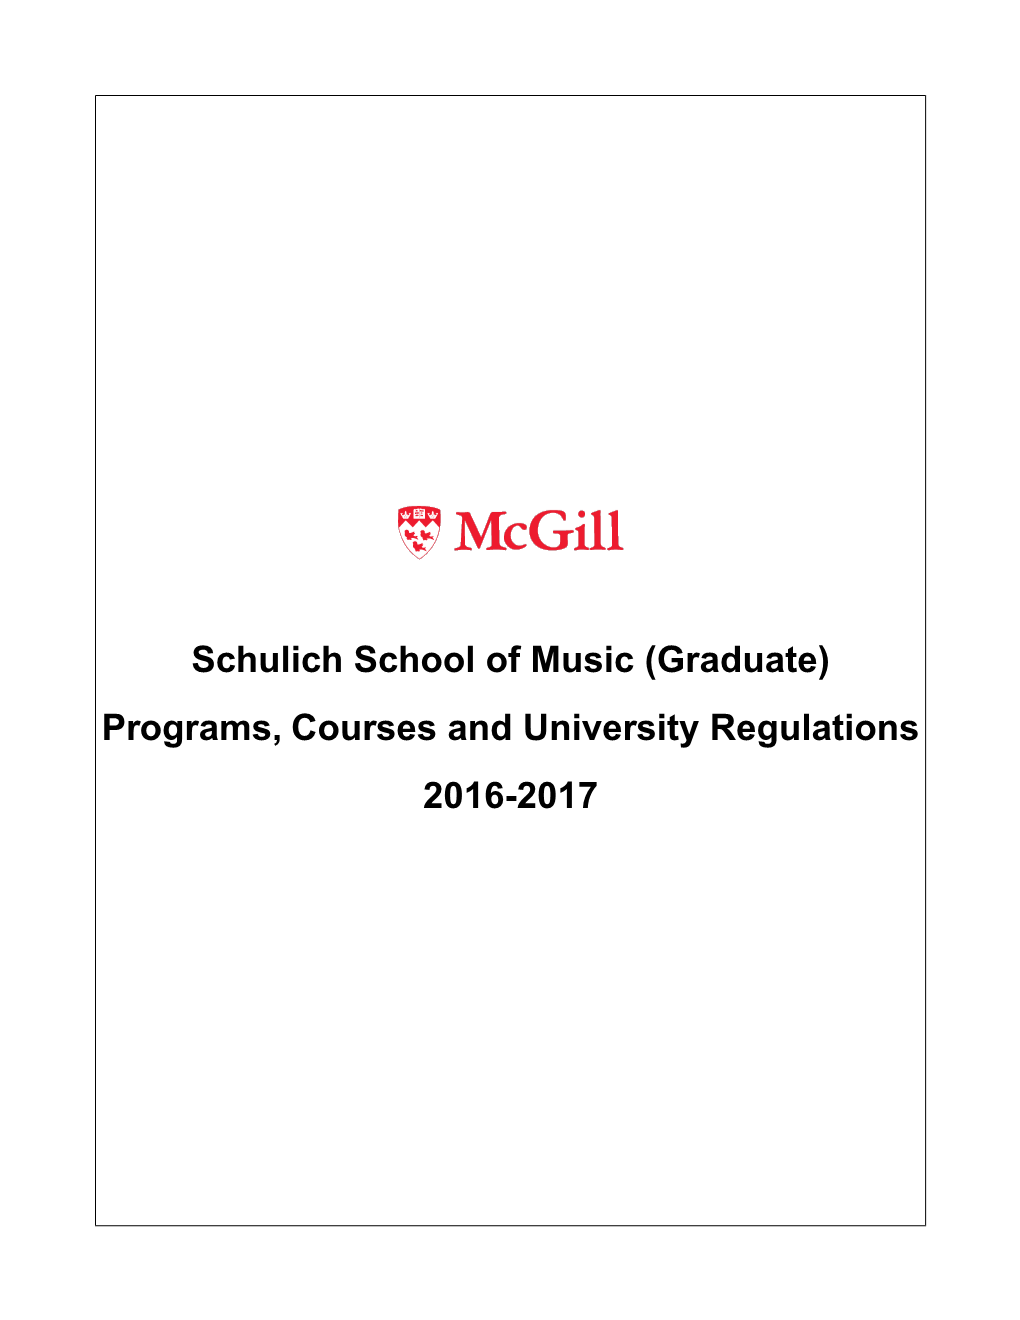 Schulich School of Music (Graduate) Programs, Courses and University Regulations 2016-2017